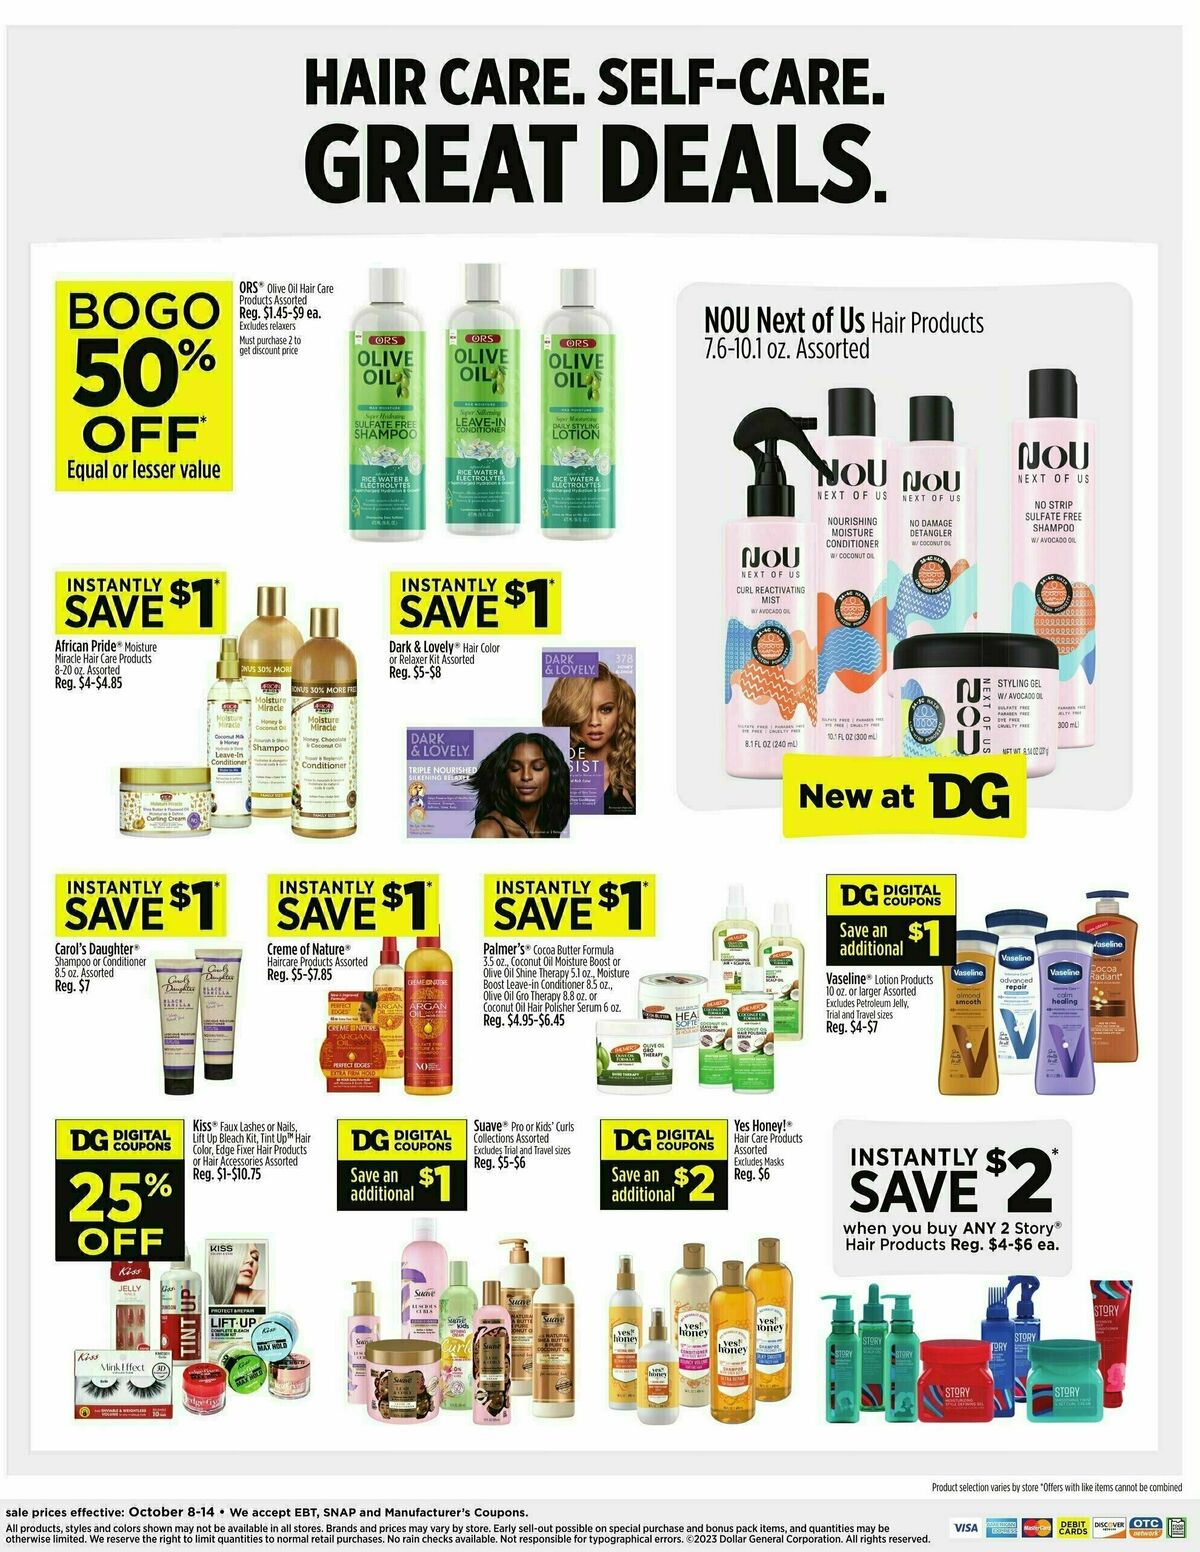 Dollar General Weekly Ad from October 8